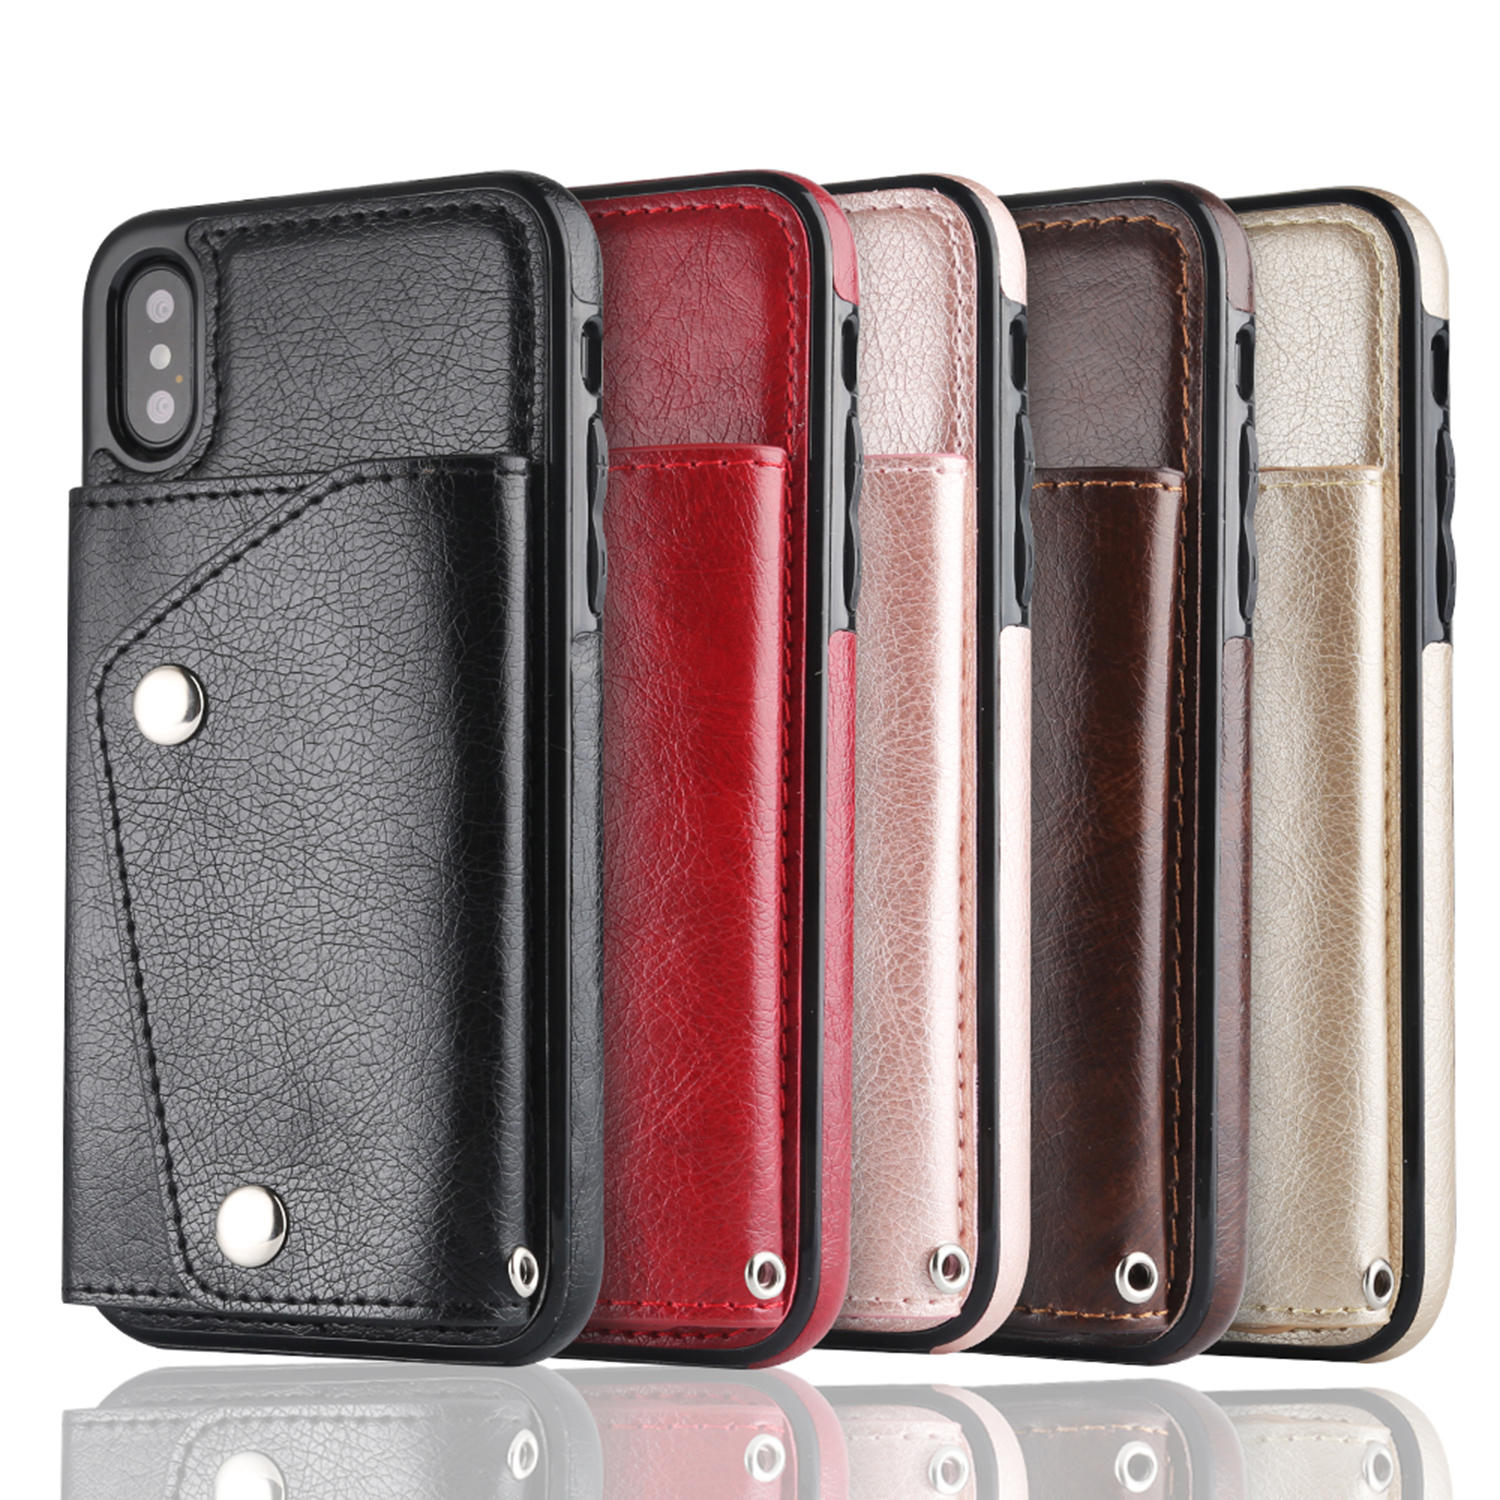 Bakeey Classic PU Leather Wallet Card Slots Bracket Case for iPhone X COD